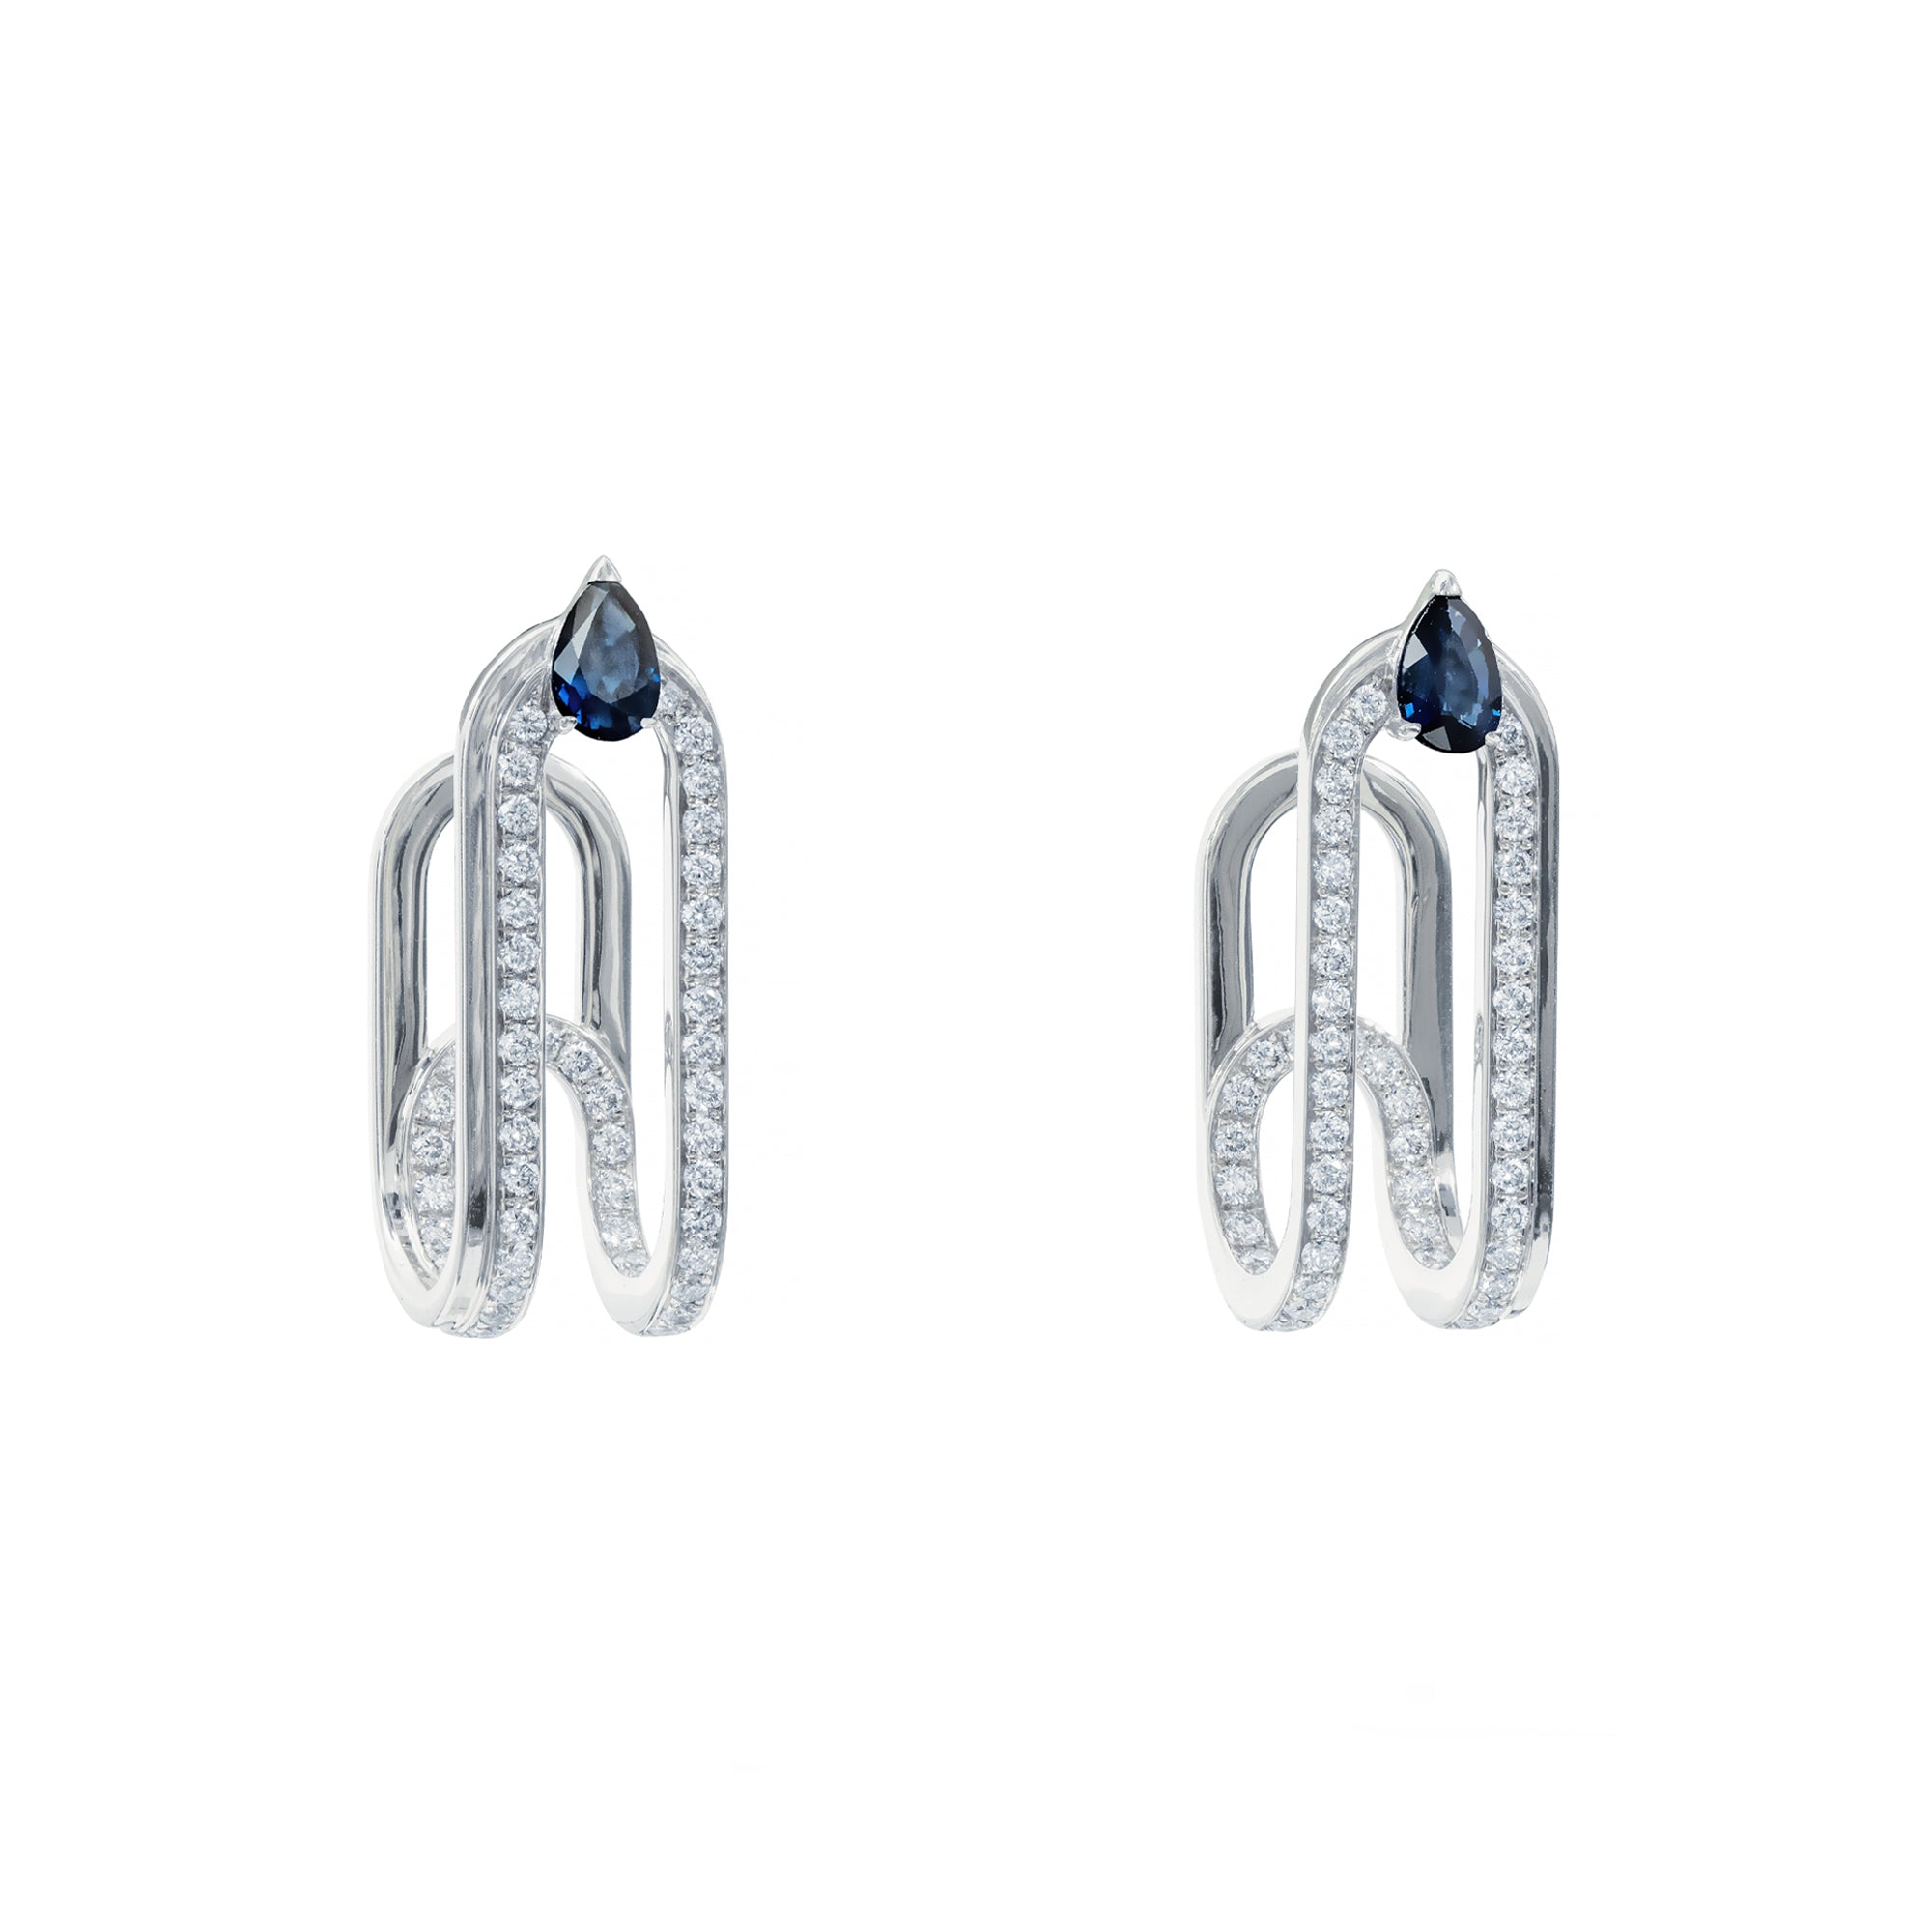 Clip White Gold Earrings With Diamonds And Sapphires